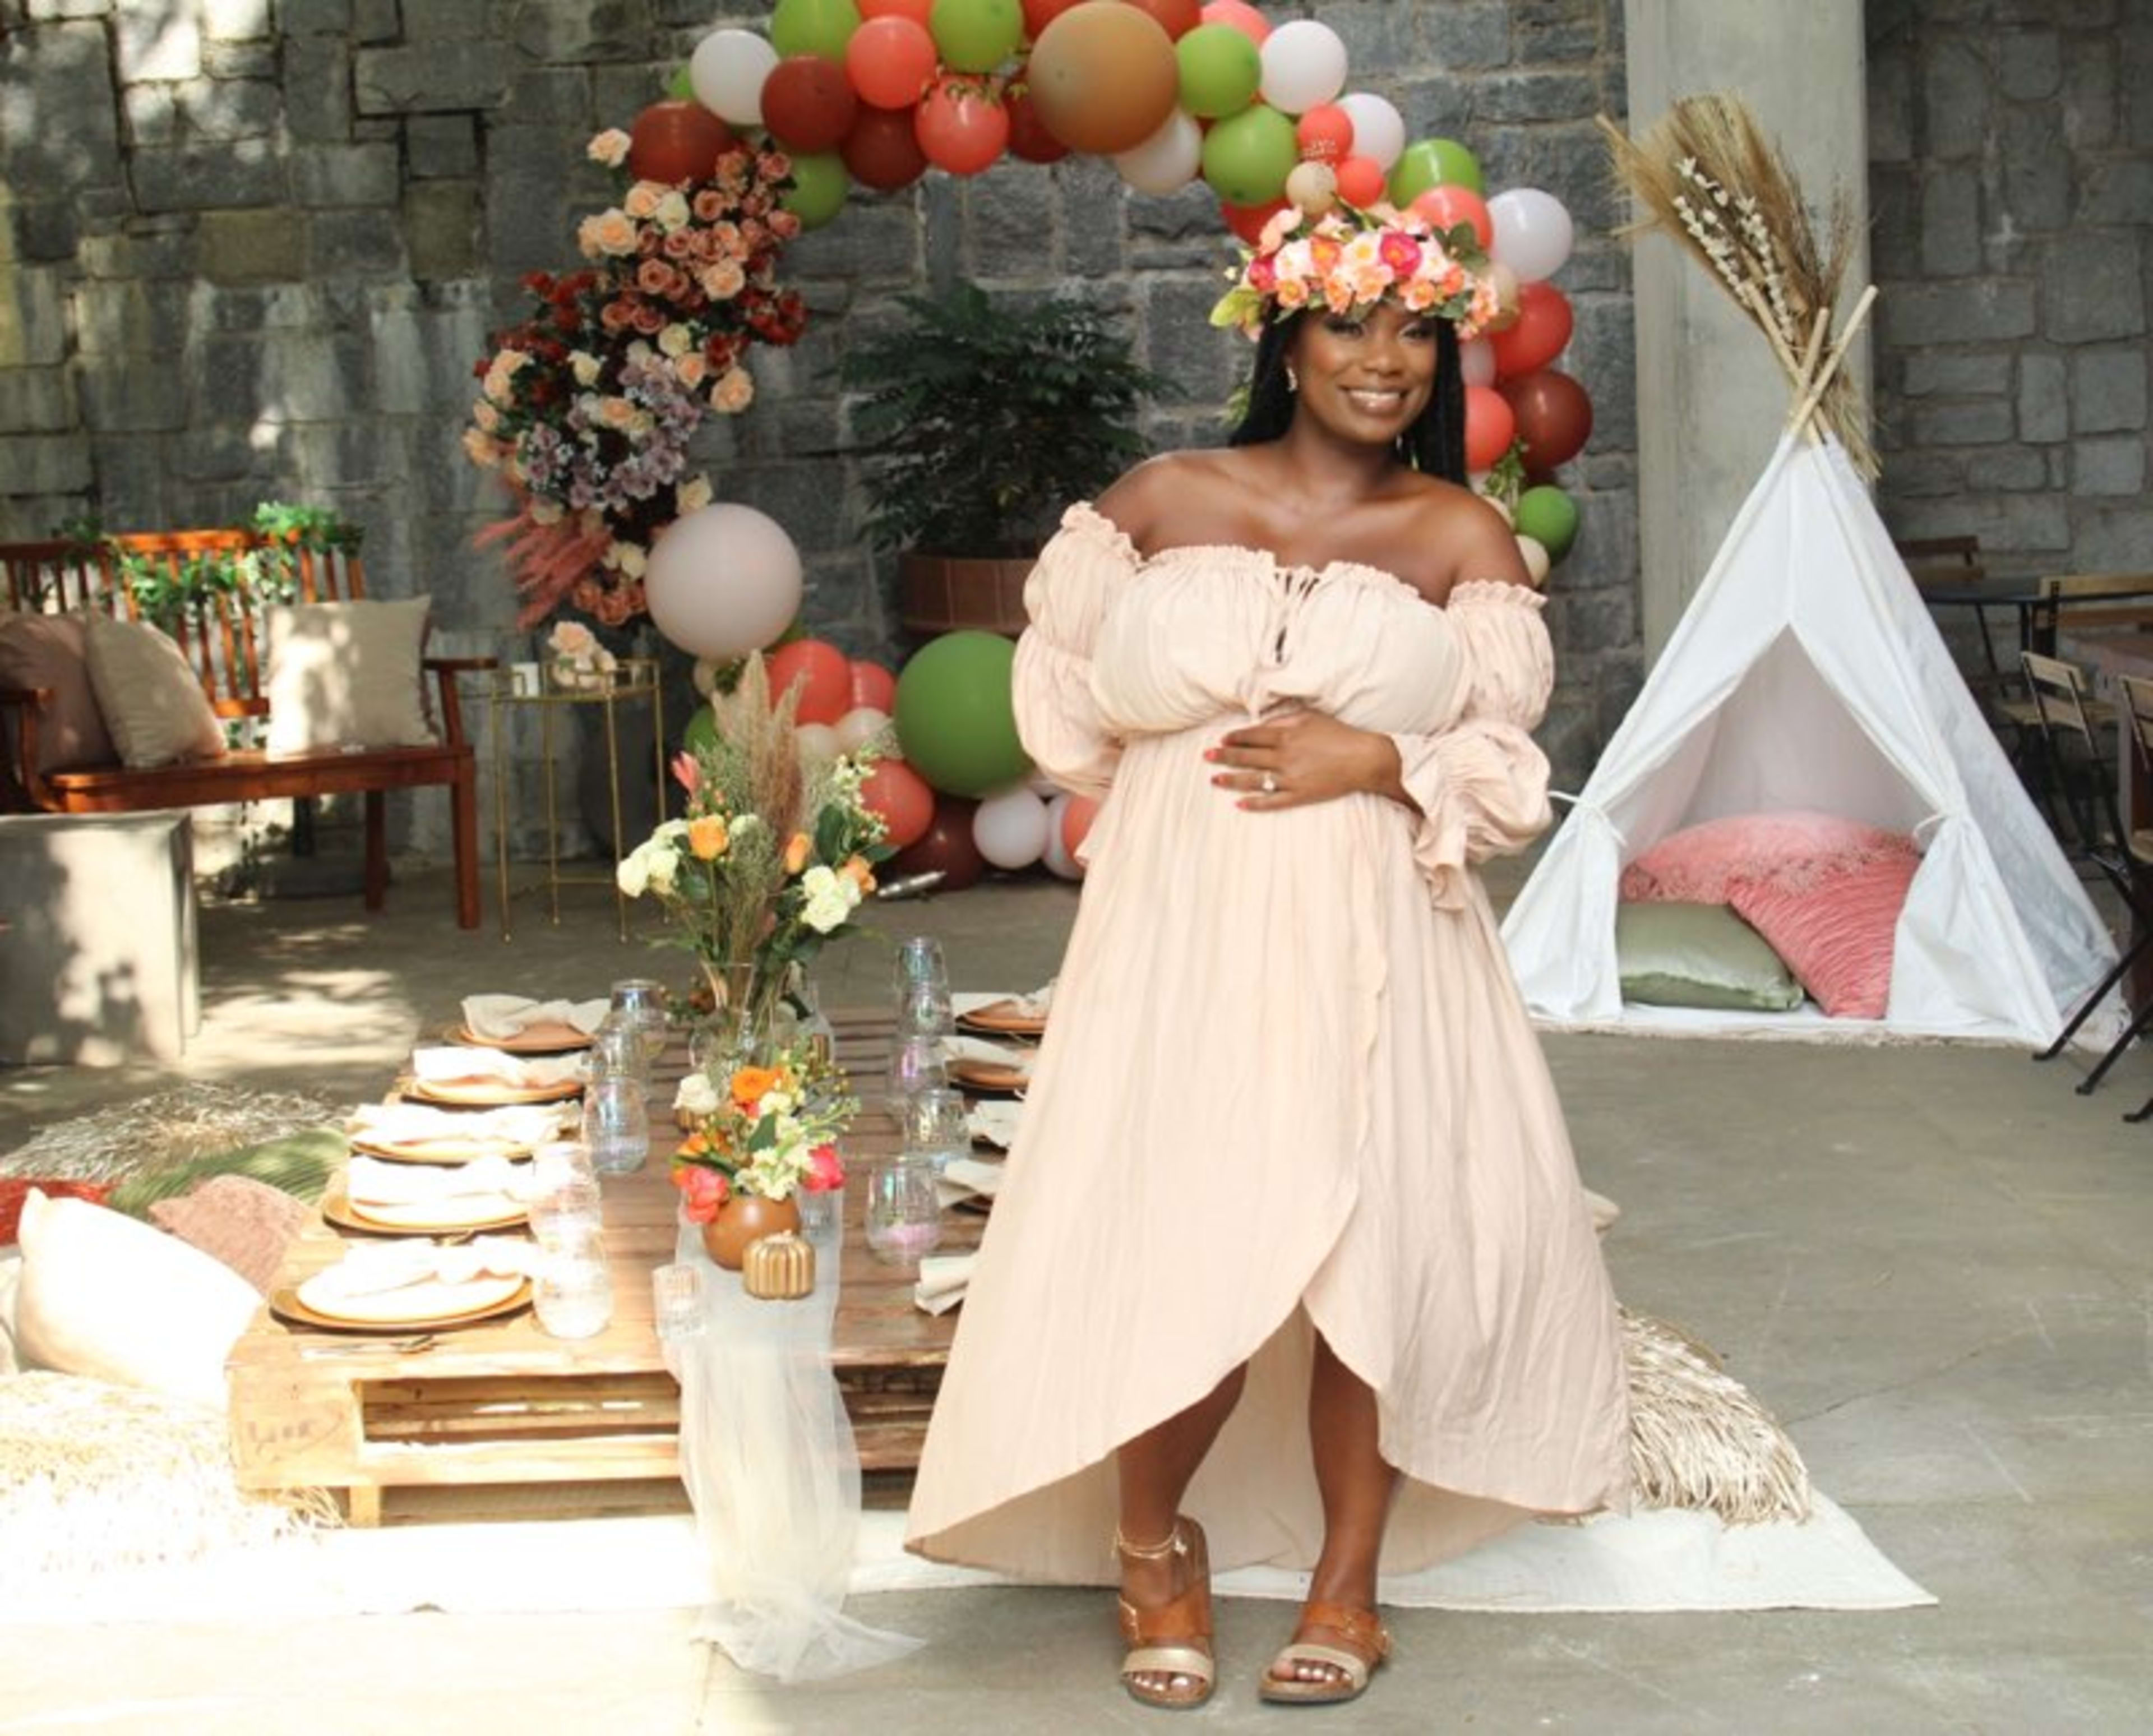 A woman standing in front of an outdoor table with boho gender-neutral balloons for a baby shower.